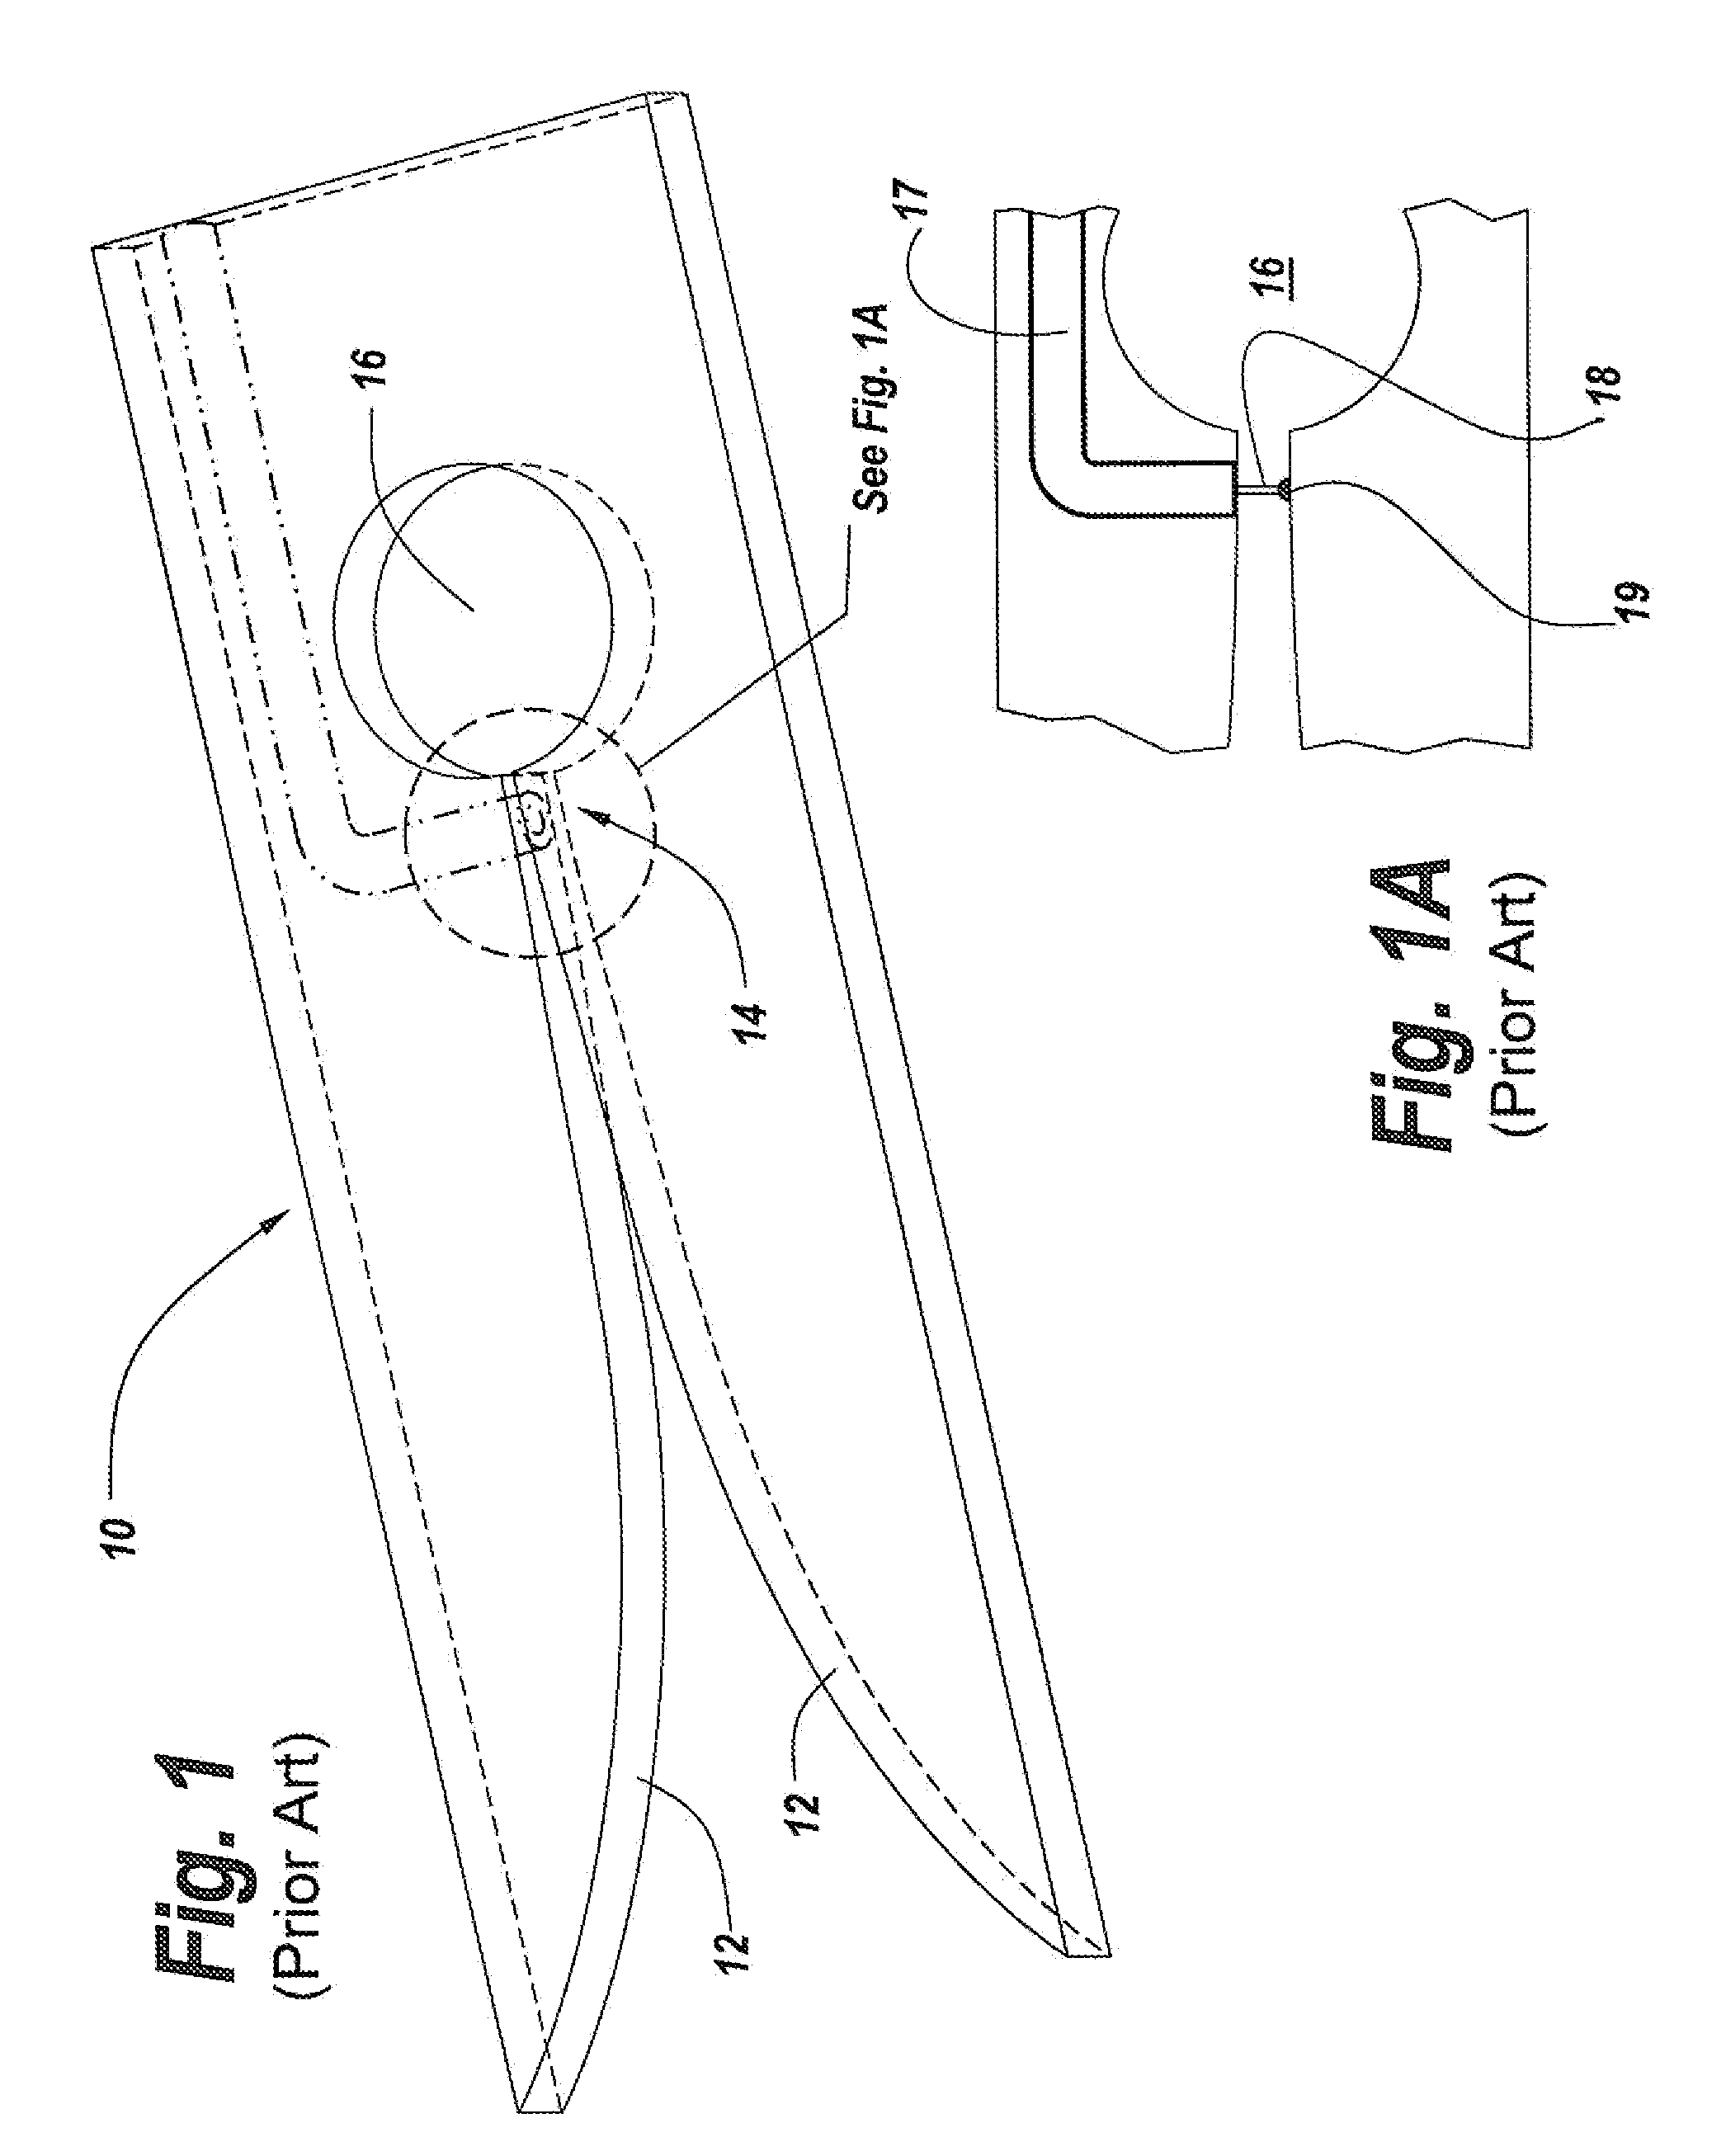 Method for direct connection of mmic amplifiers to balanced antenna aperture